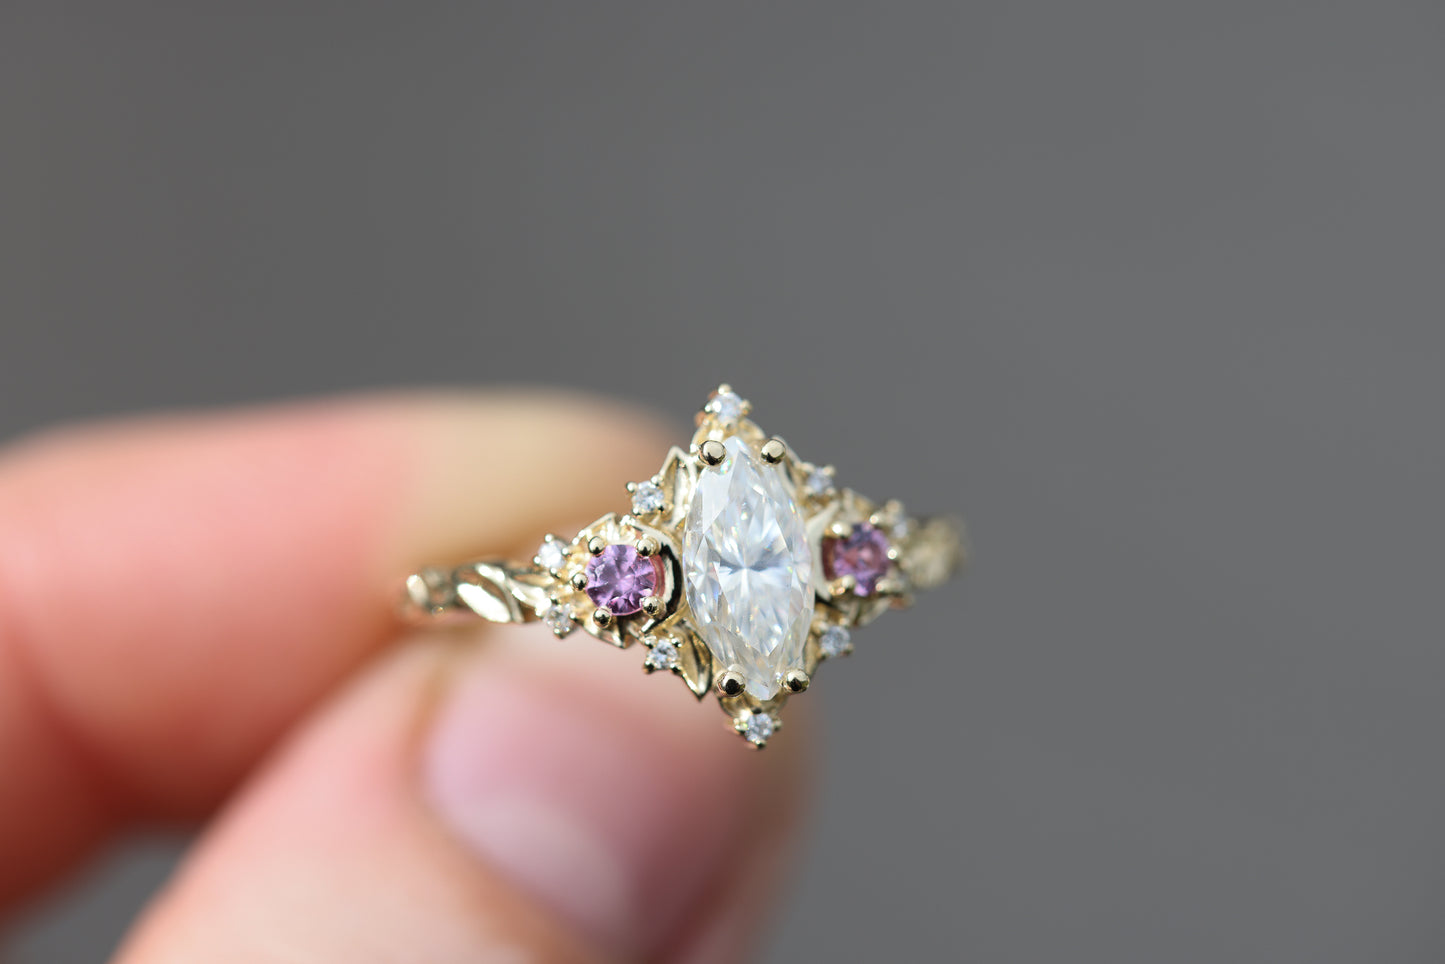 Briar moon three stone with marquise moissanite and round pink sapphire side stones